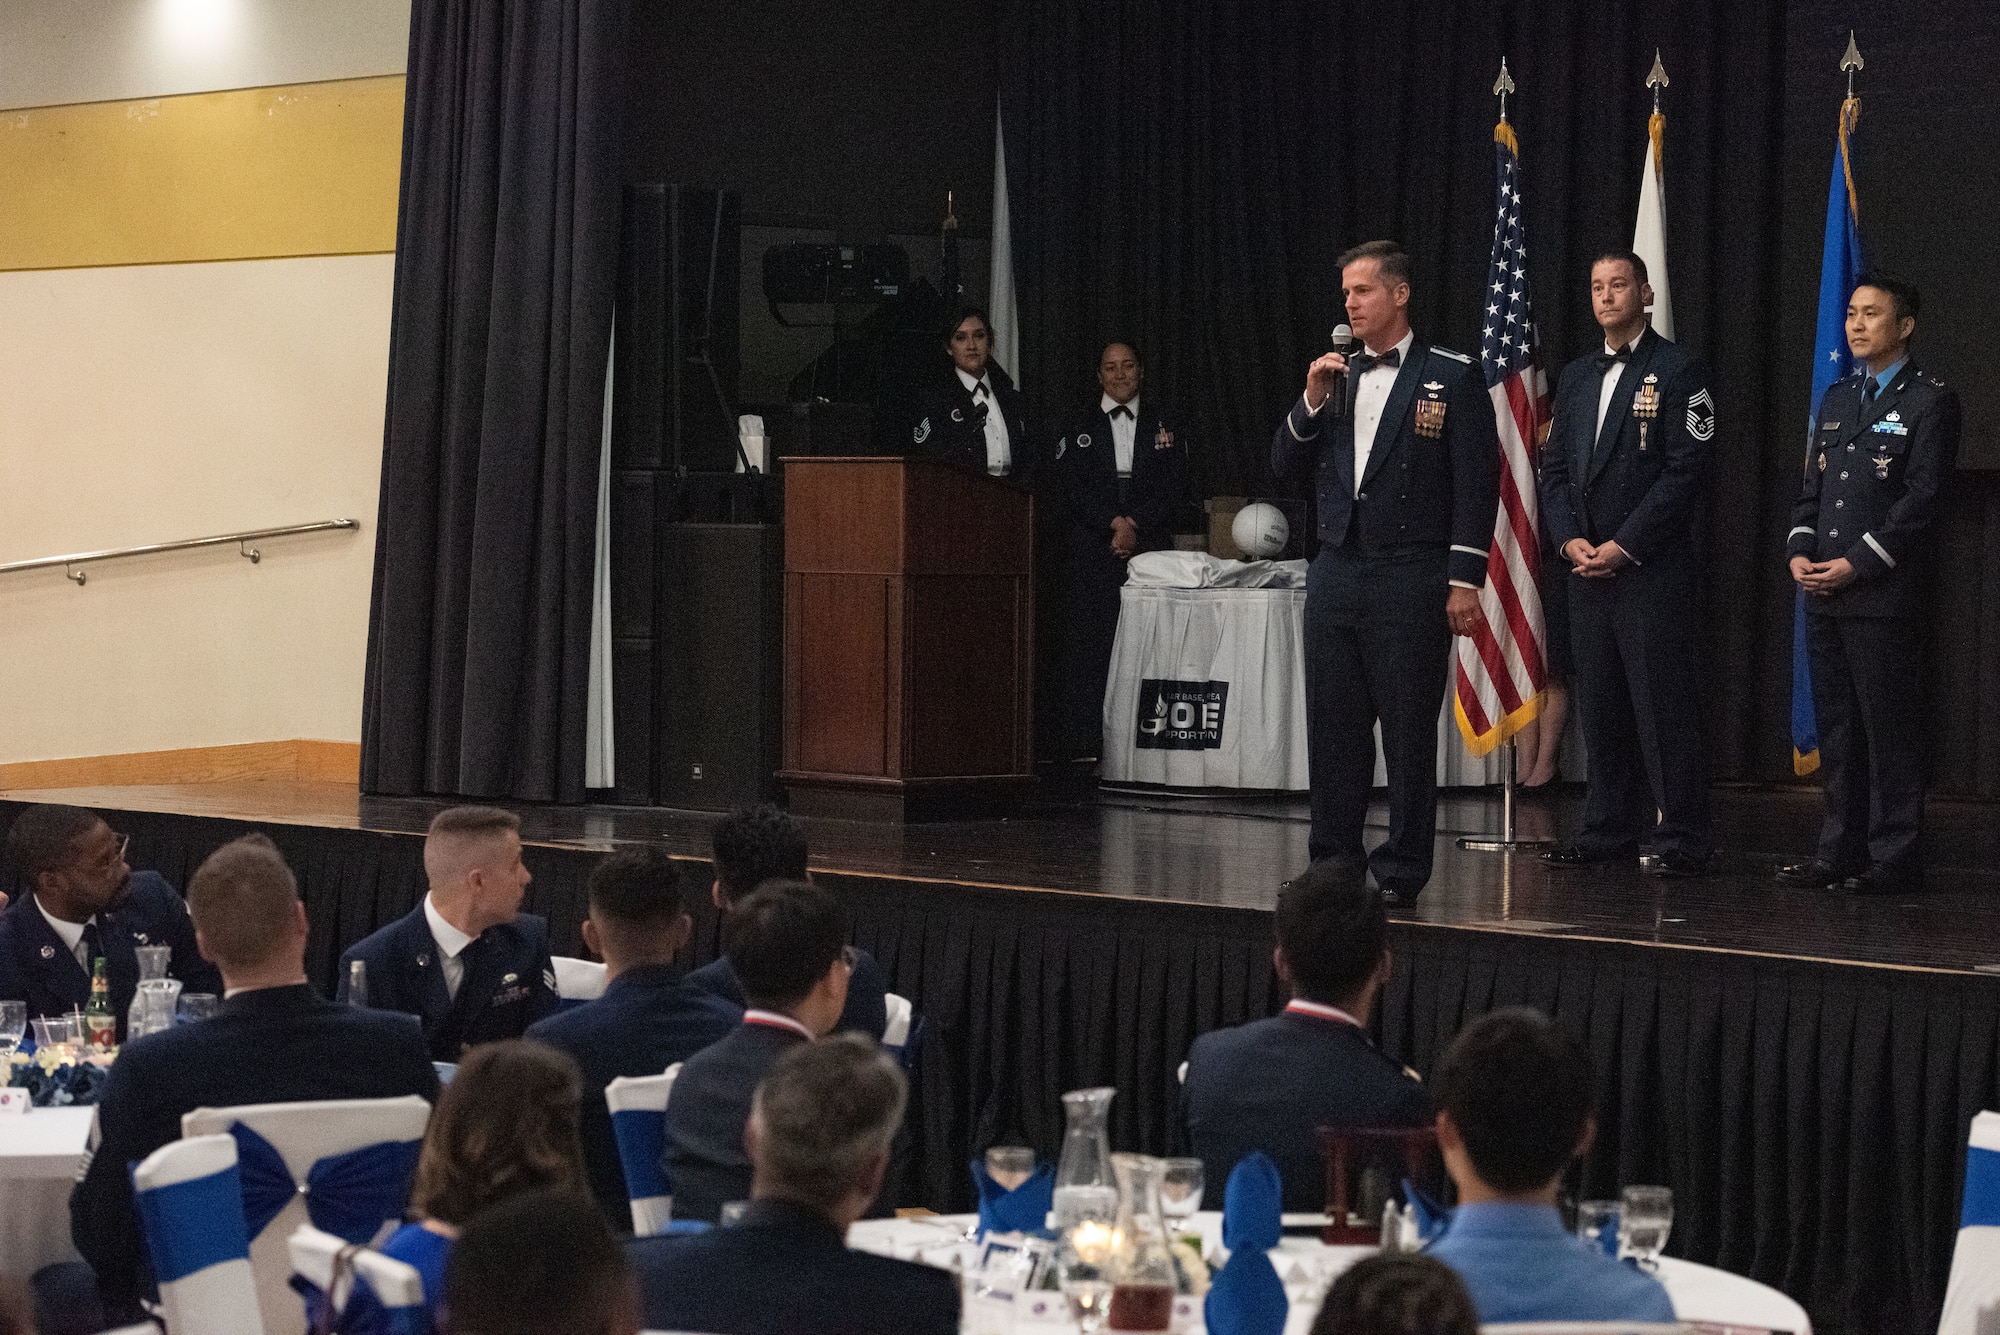 The 51st Fighter Wing commander, Col. Joshua Wood, delivers a congratulatory speech to graduates of Airman Leadership School